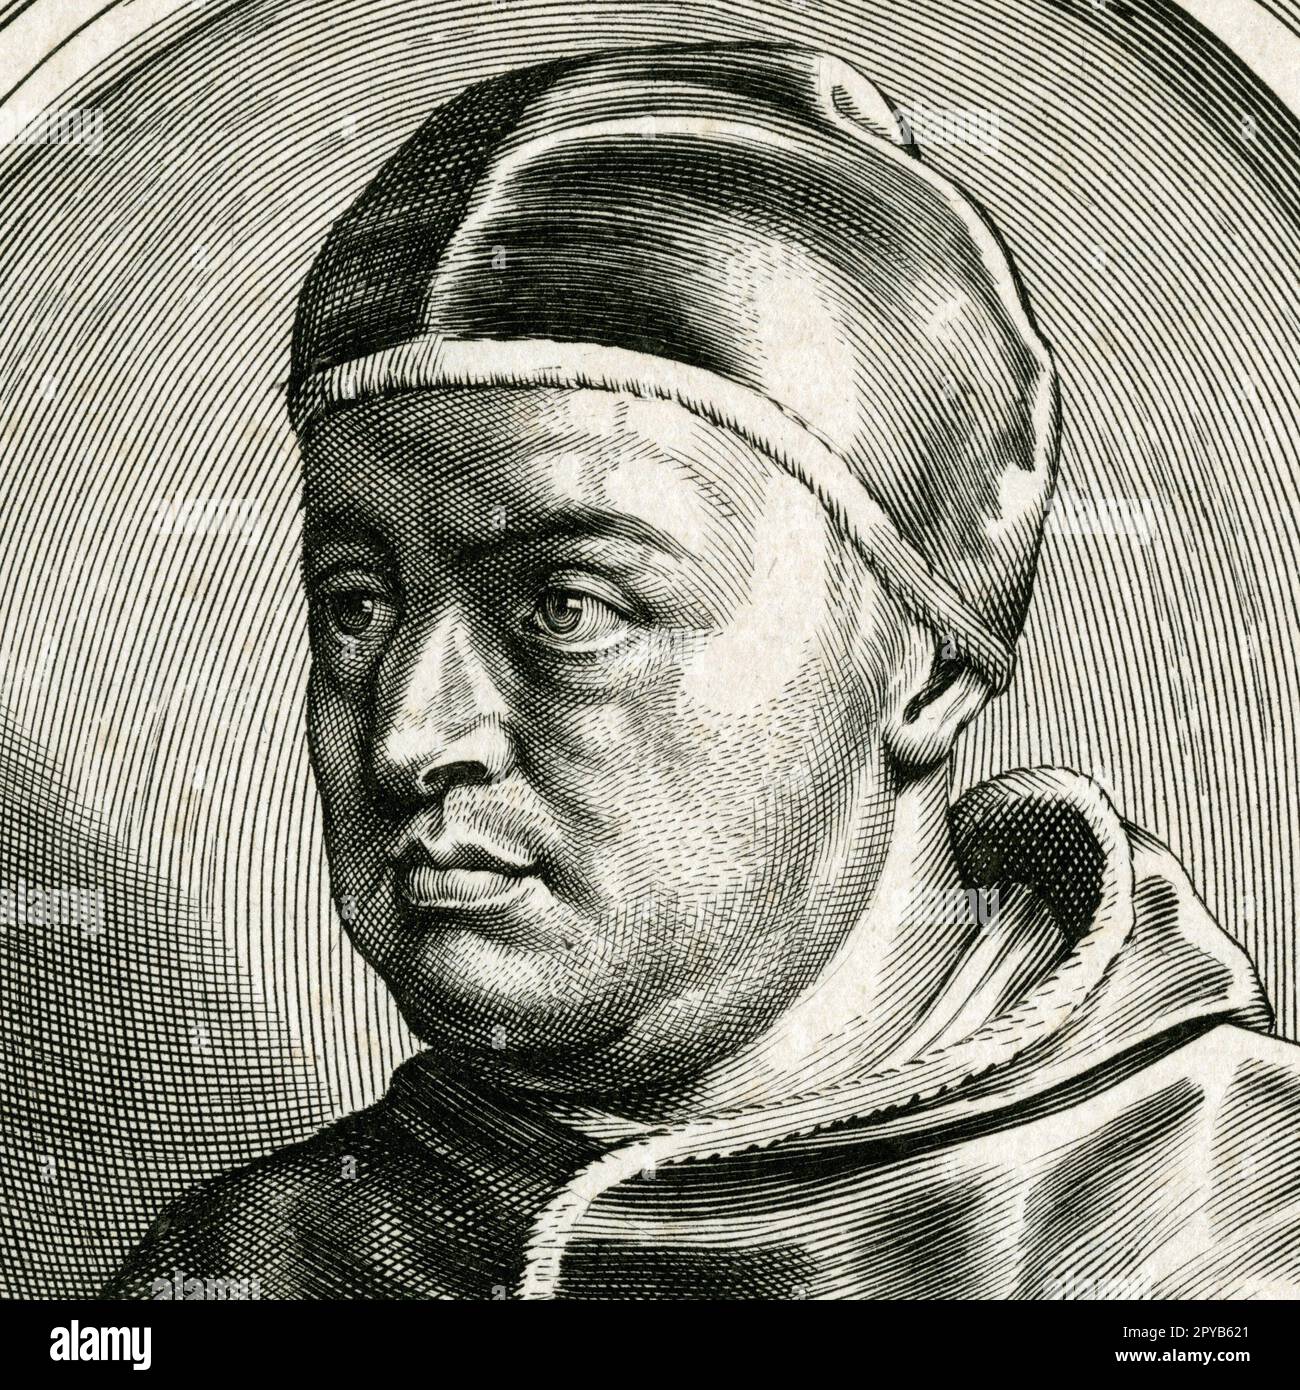 Renaissance Medici Pope, Leo X (1474-1521). Square detail of engraving created by William Faithorne the Elder (1620 - 1691) for Johan Sleidan's 'History of the Reformation', published in 1689. Stock Photo